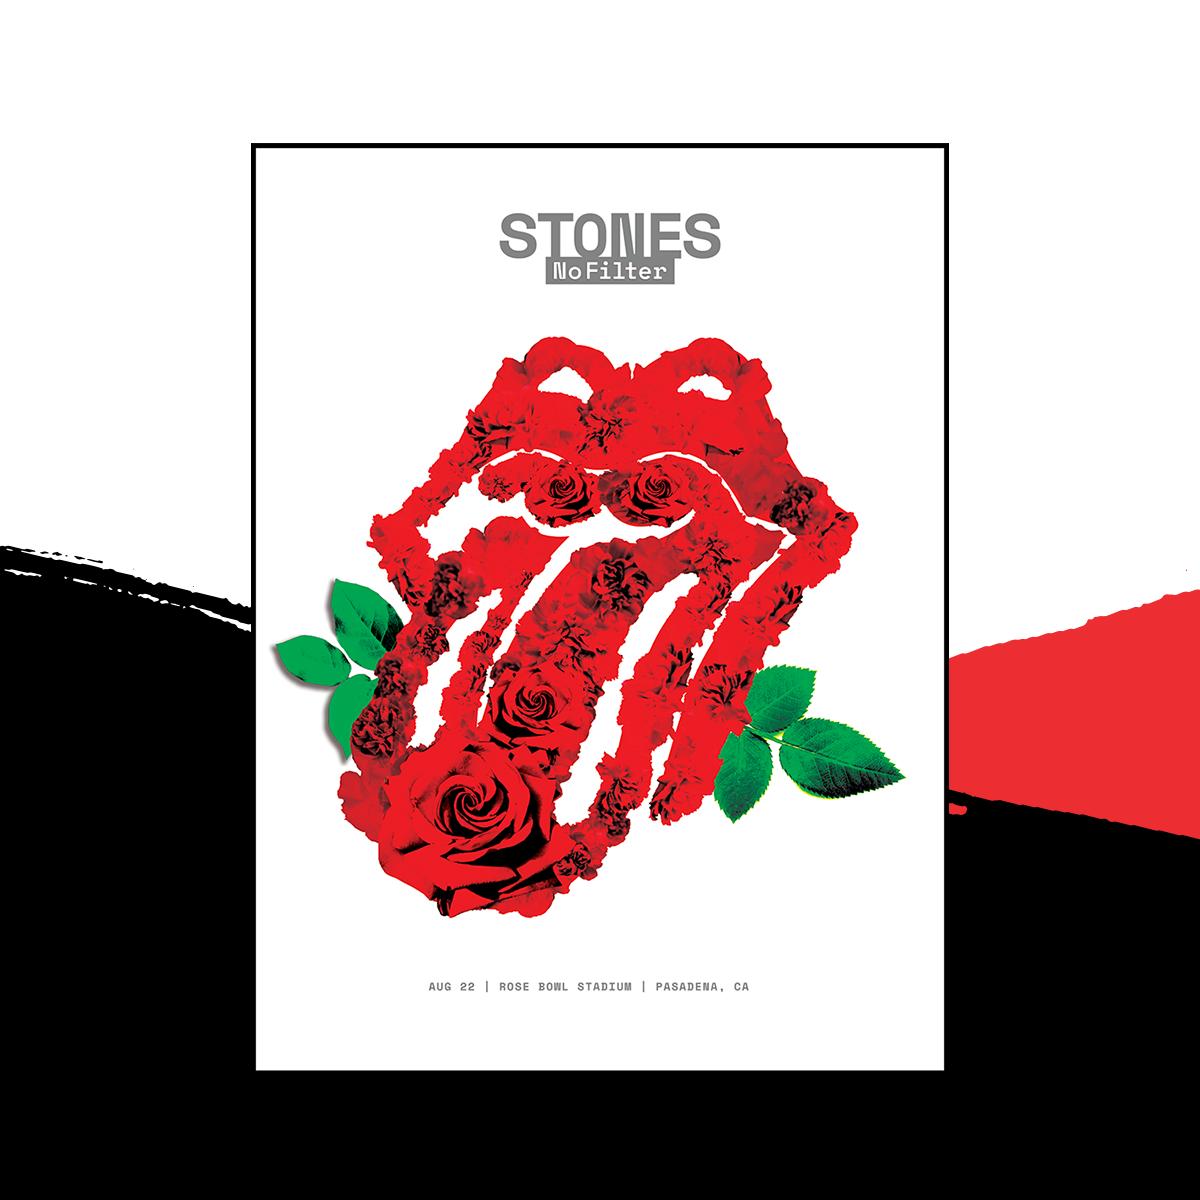 The Rolling Stones Played The Rose Bowl In Pasadena Welcomed